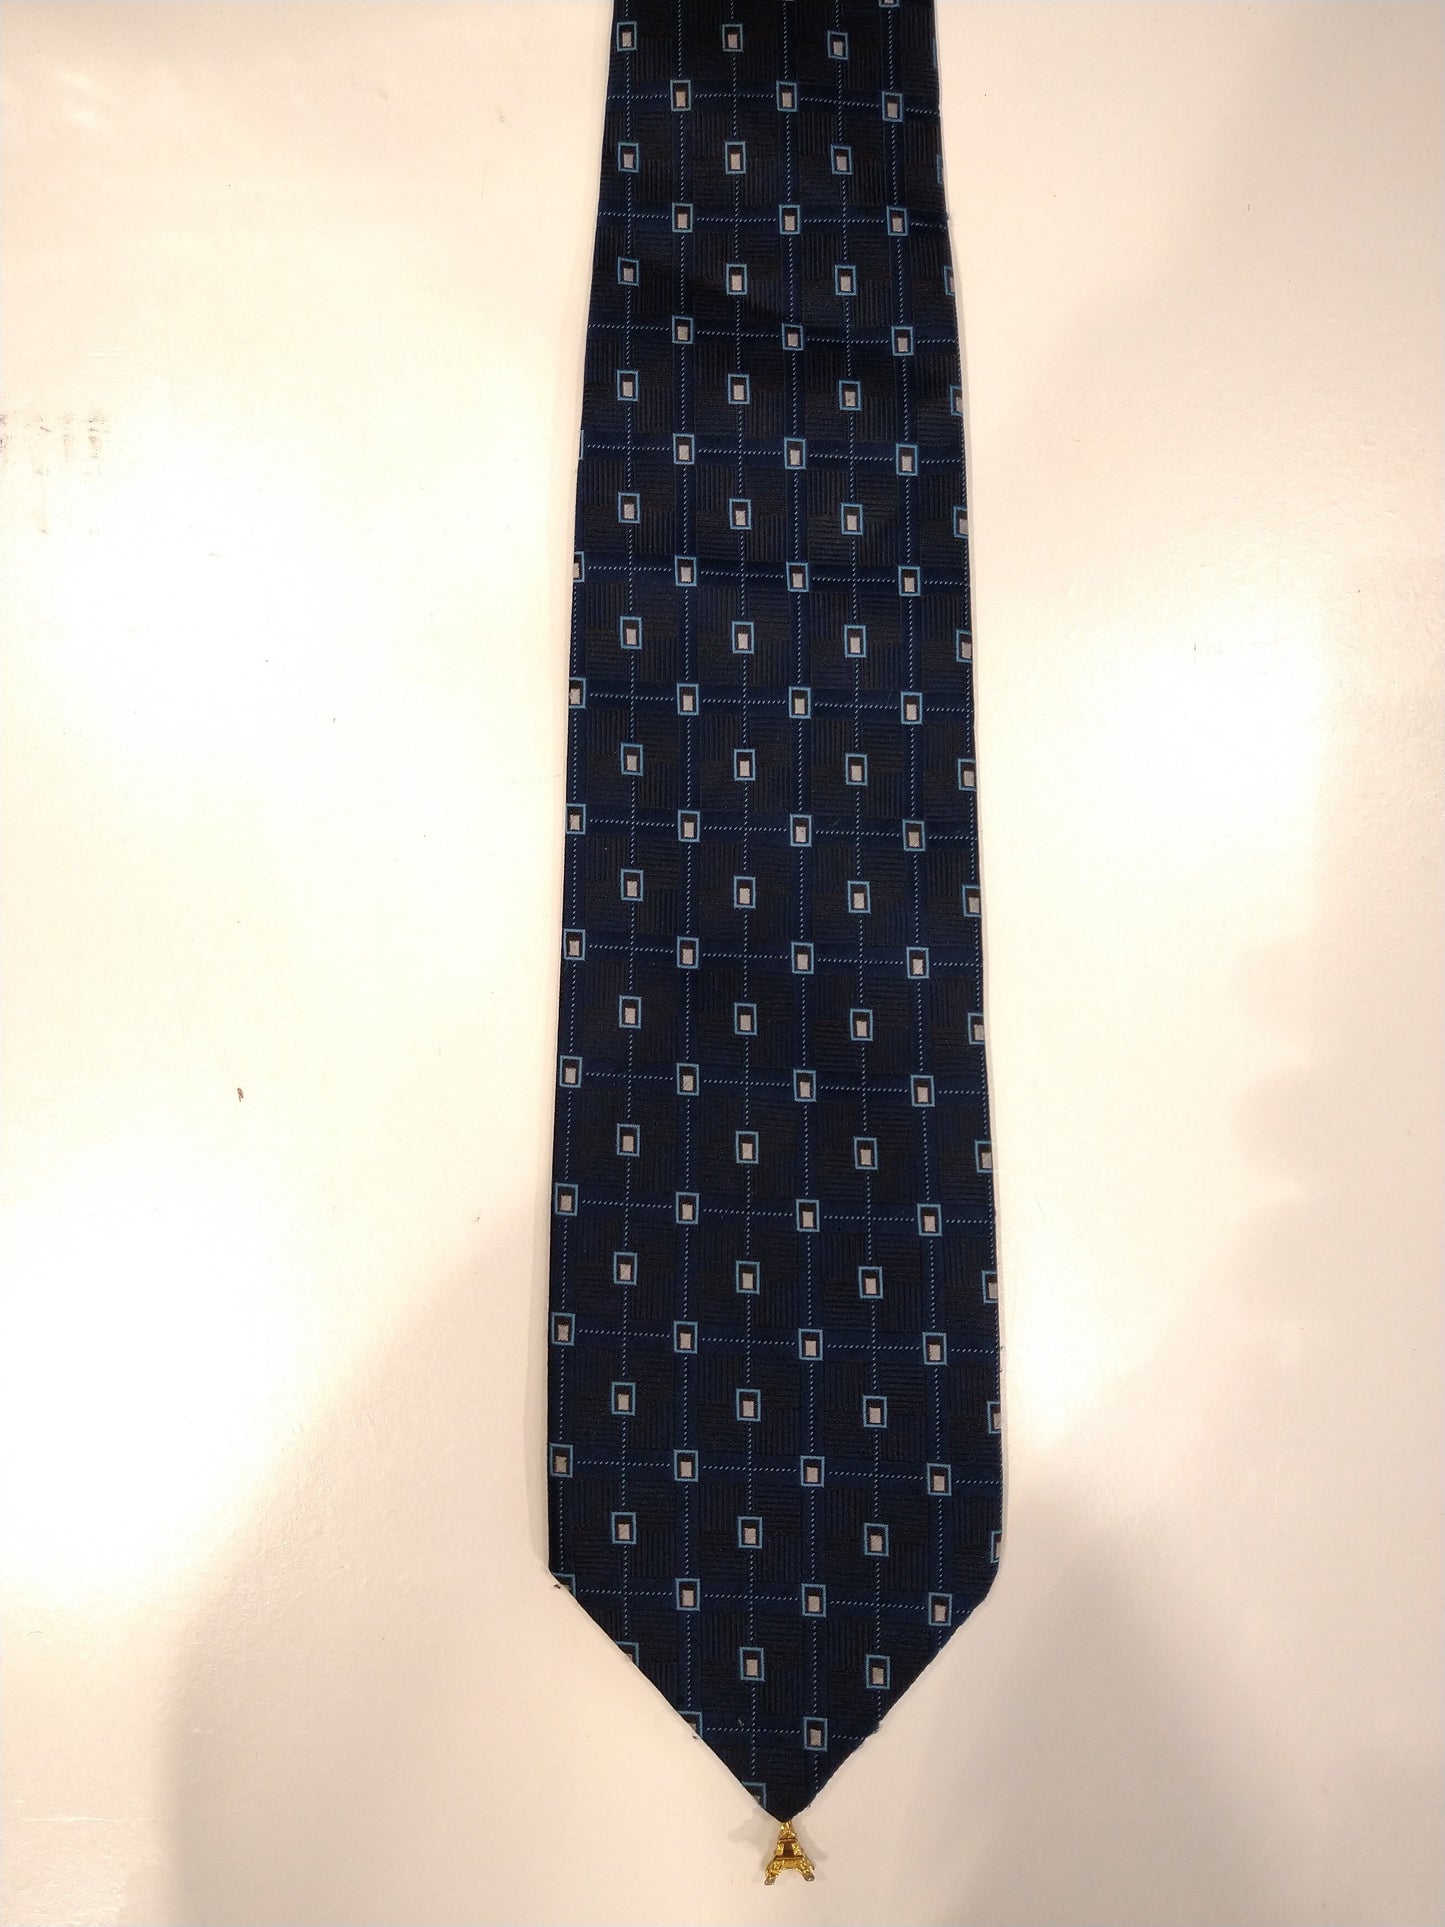 Separate haute couture wecon polyester tie. Blue motif with pendant Eiffel tower.